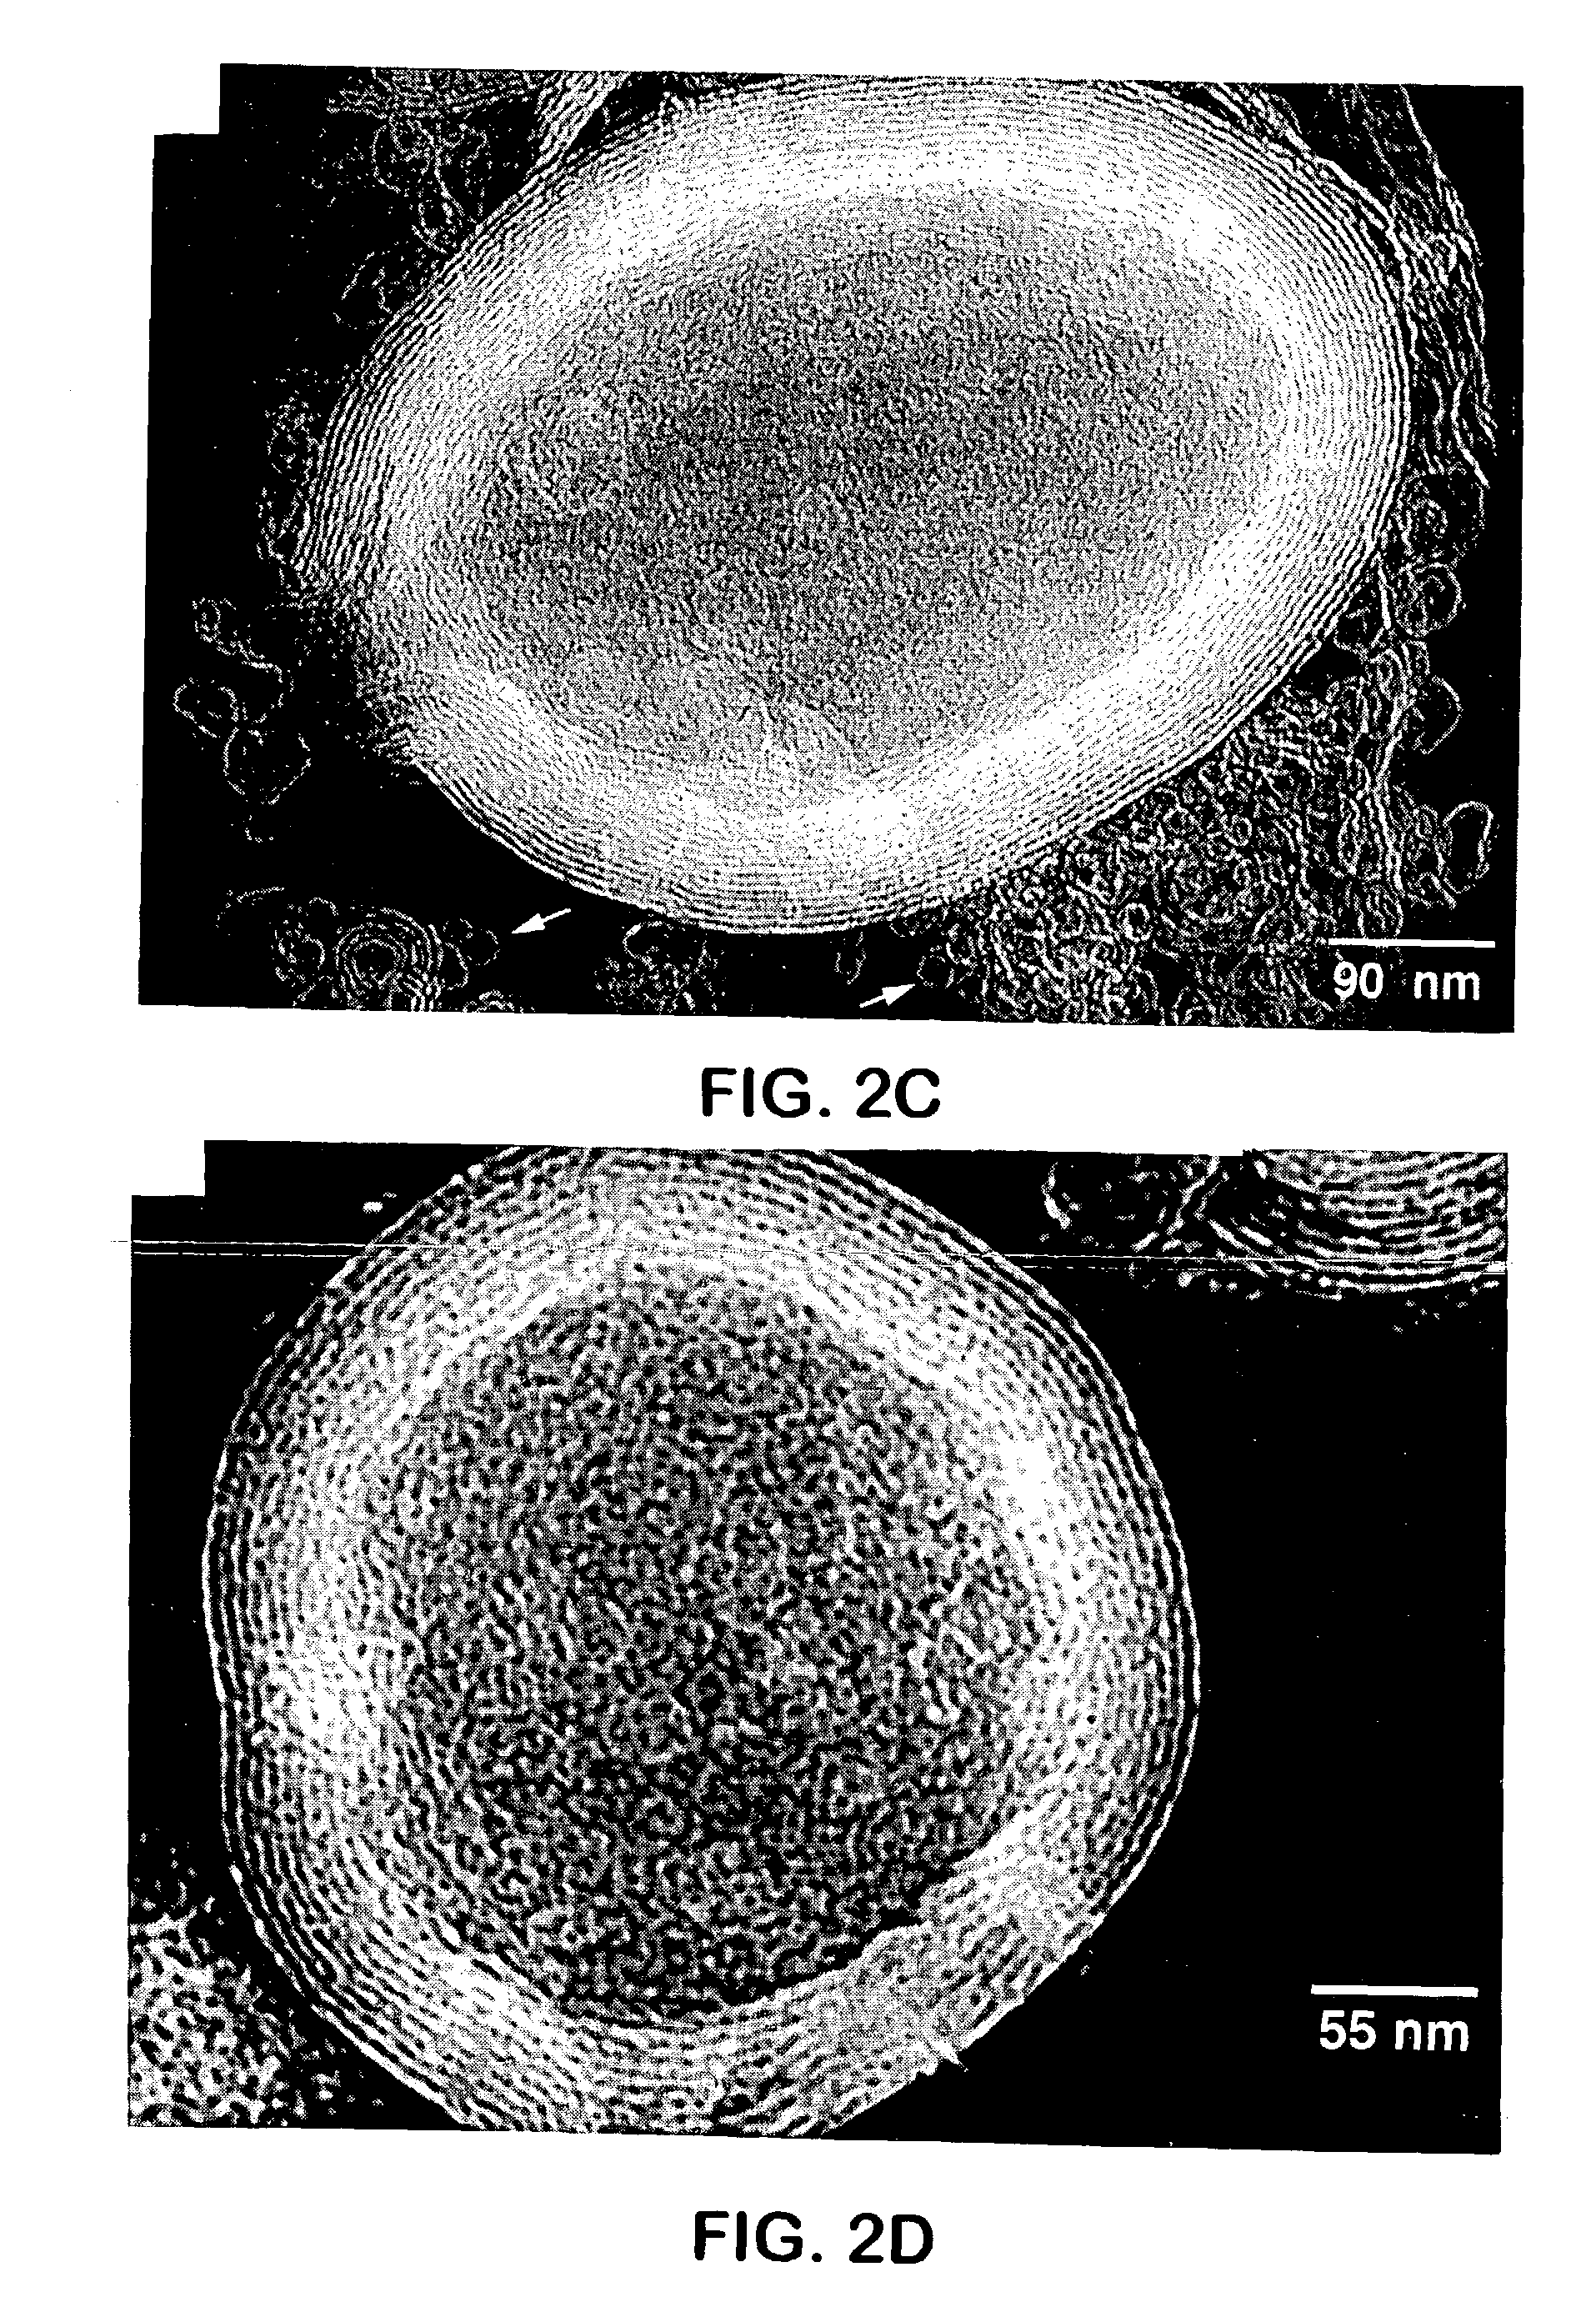 Ultra-stable lamellar mesoporous silica compositions and process for the preparation thereof